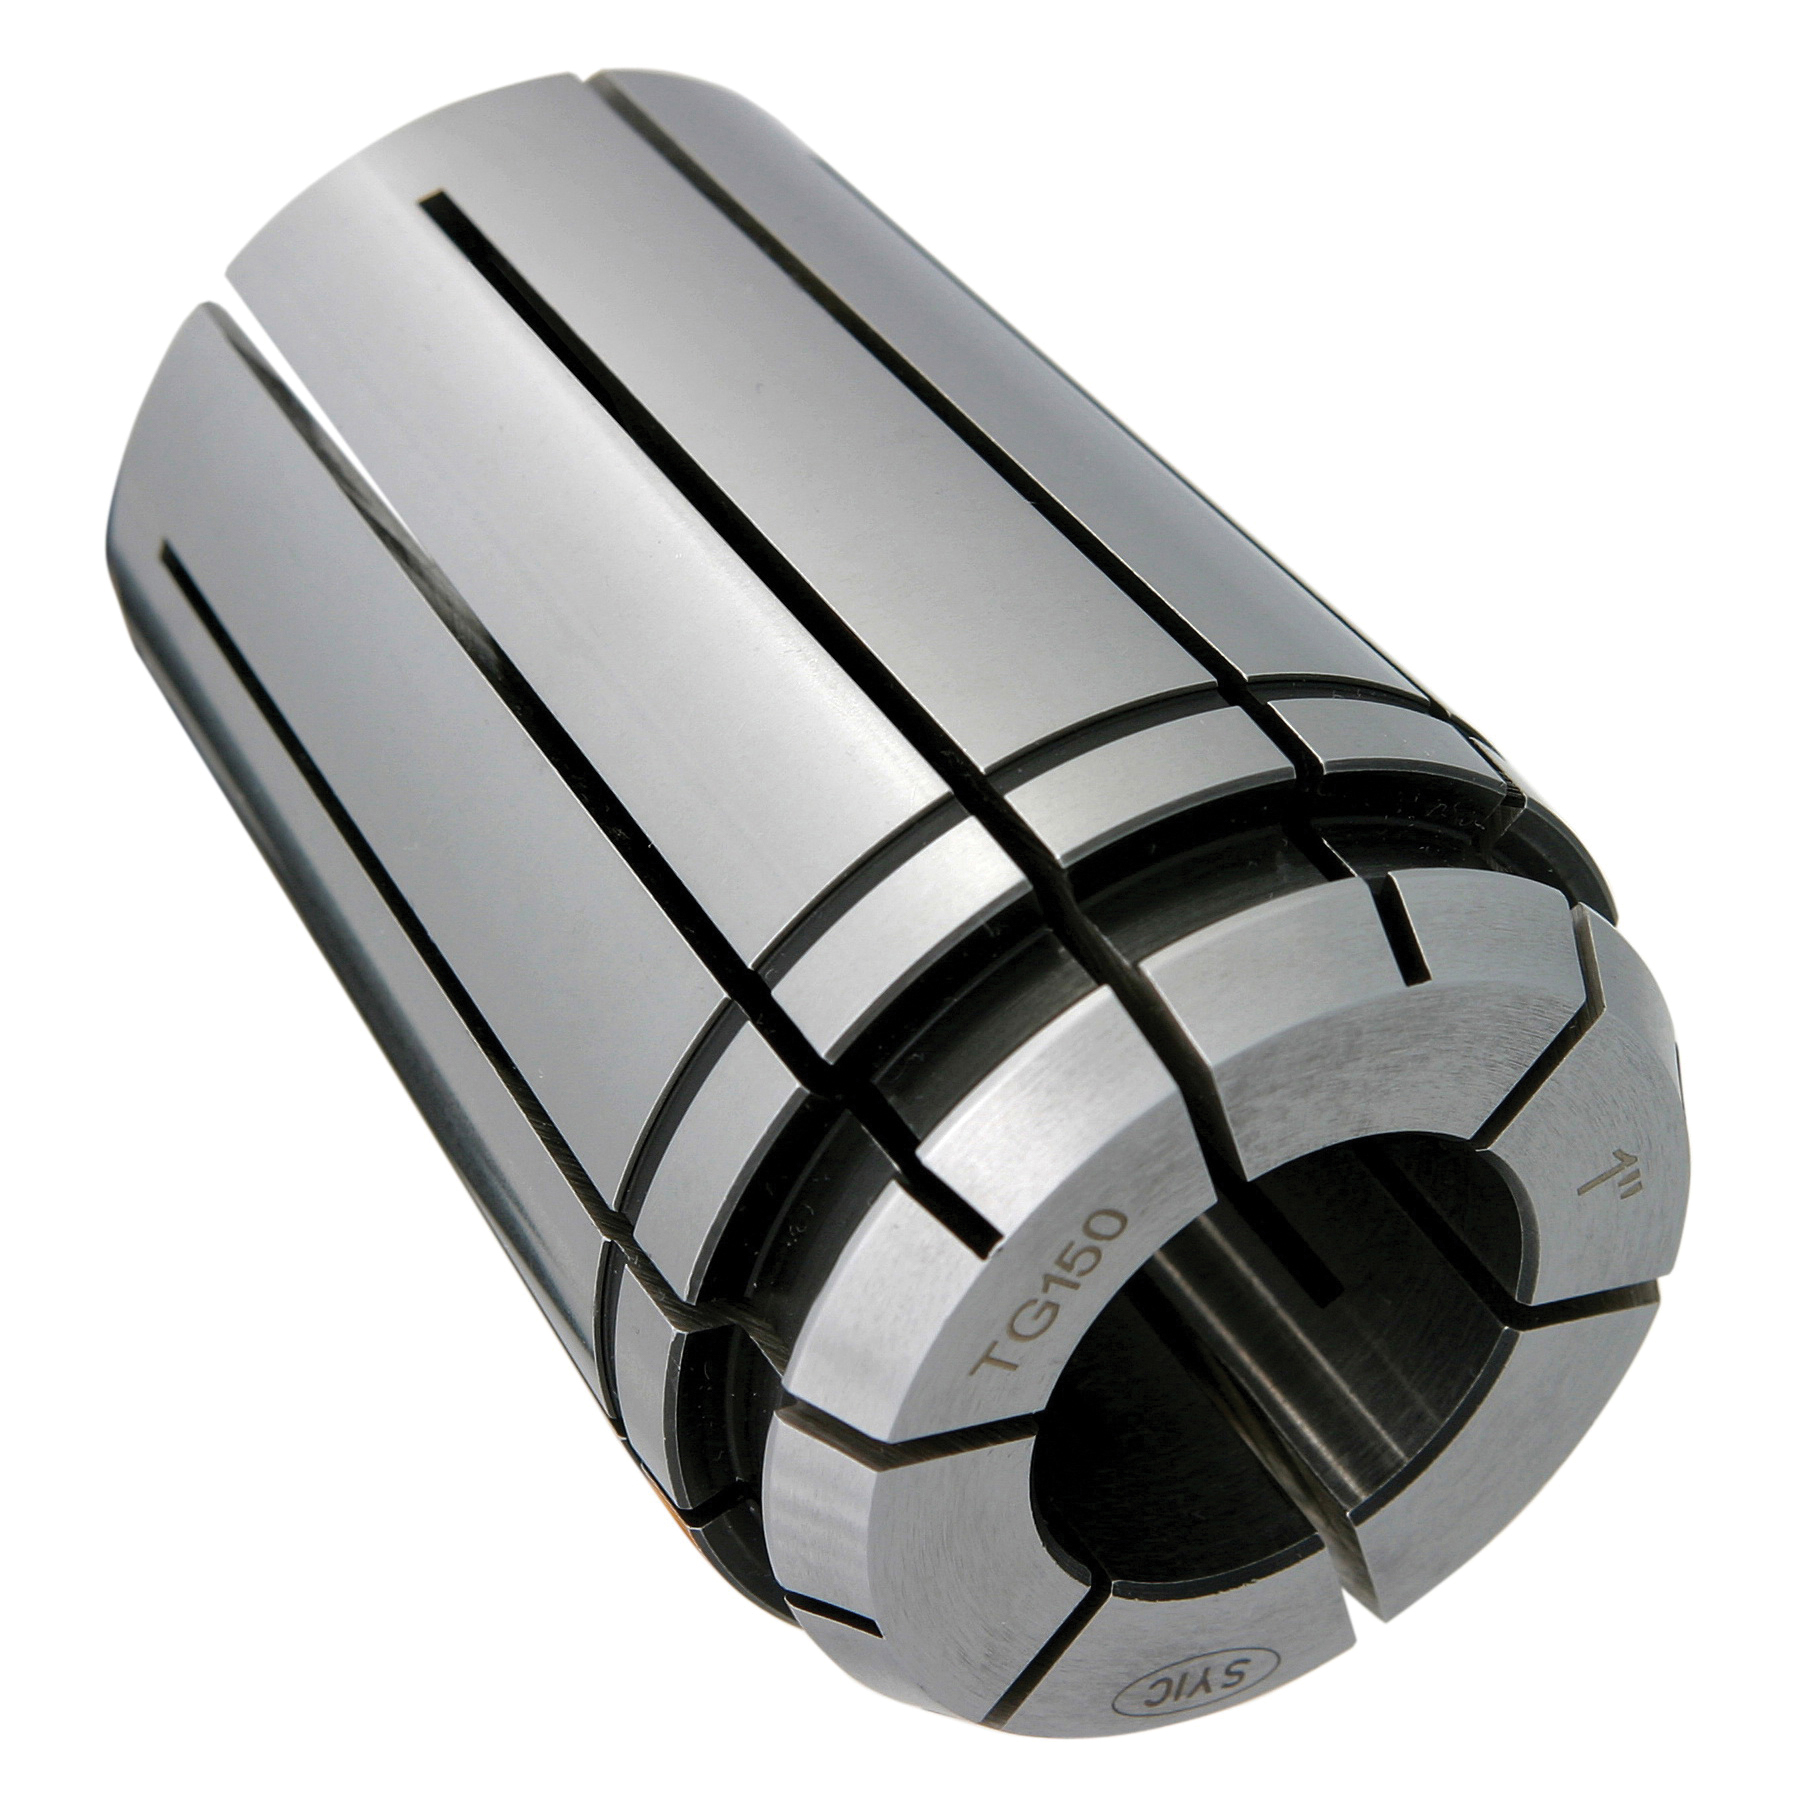 TG150 1-5/32" COLLET